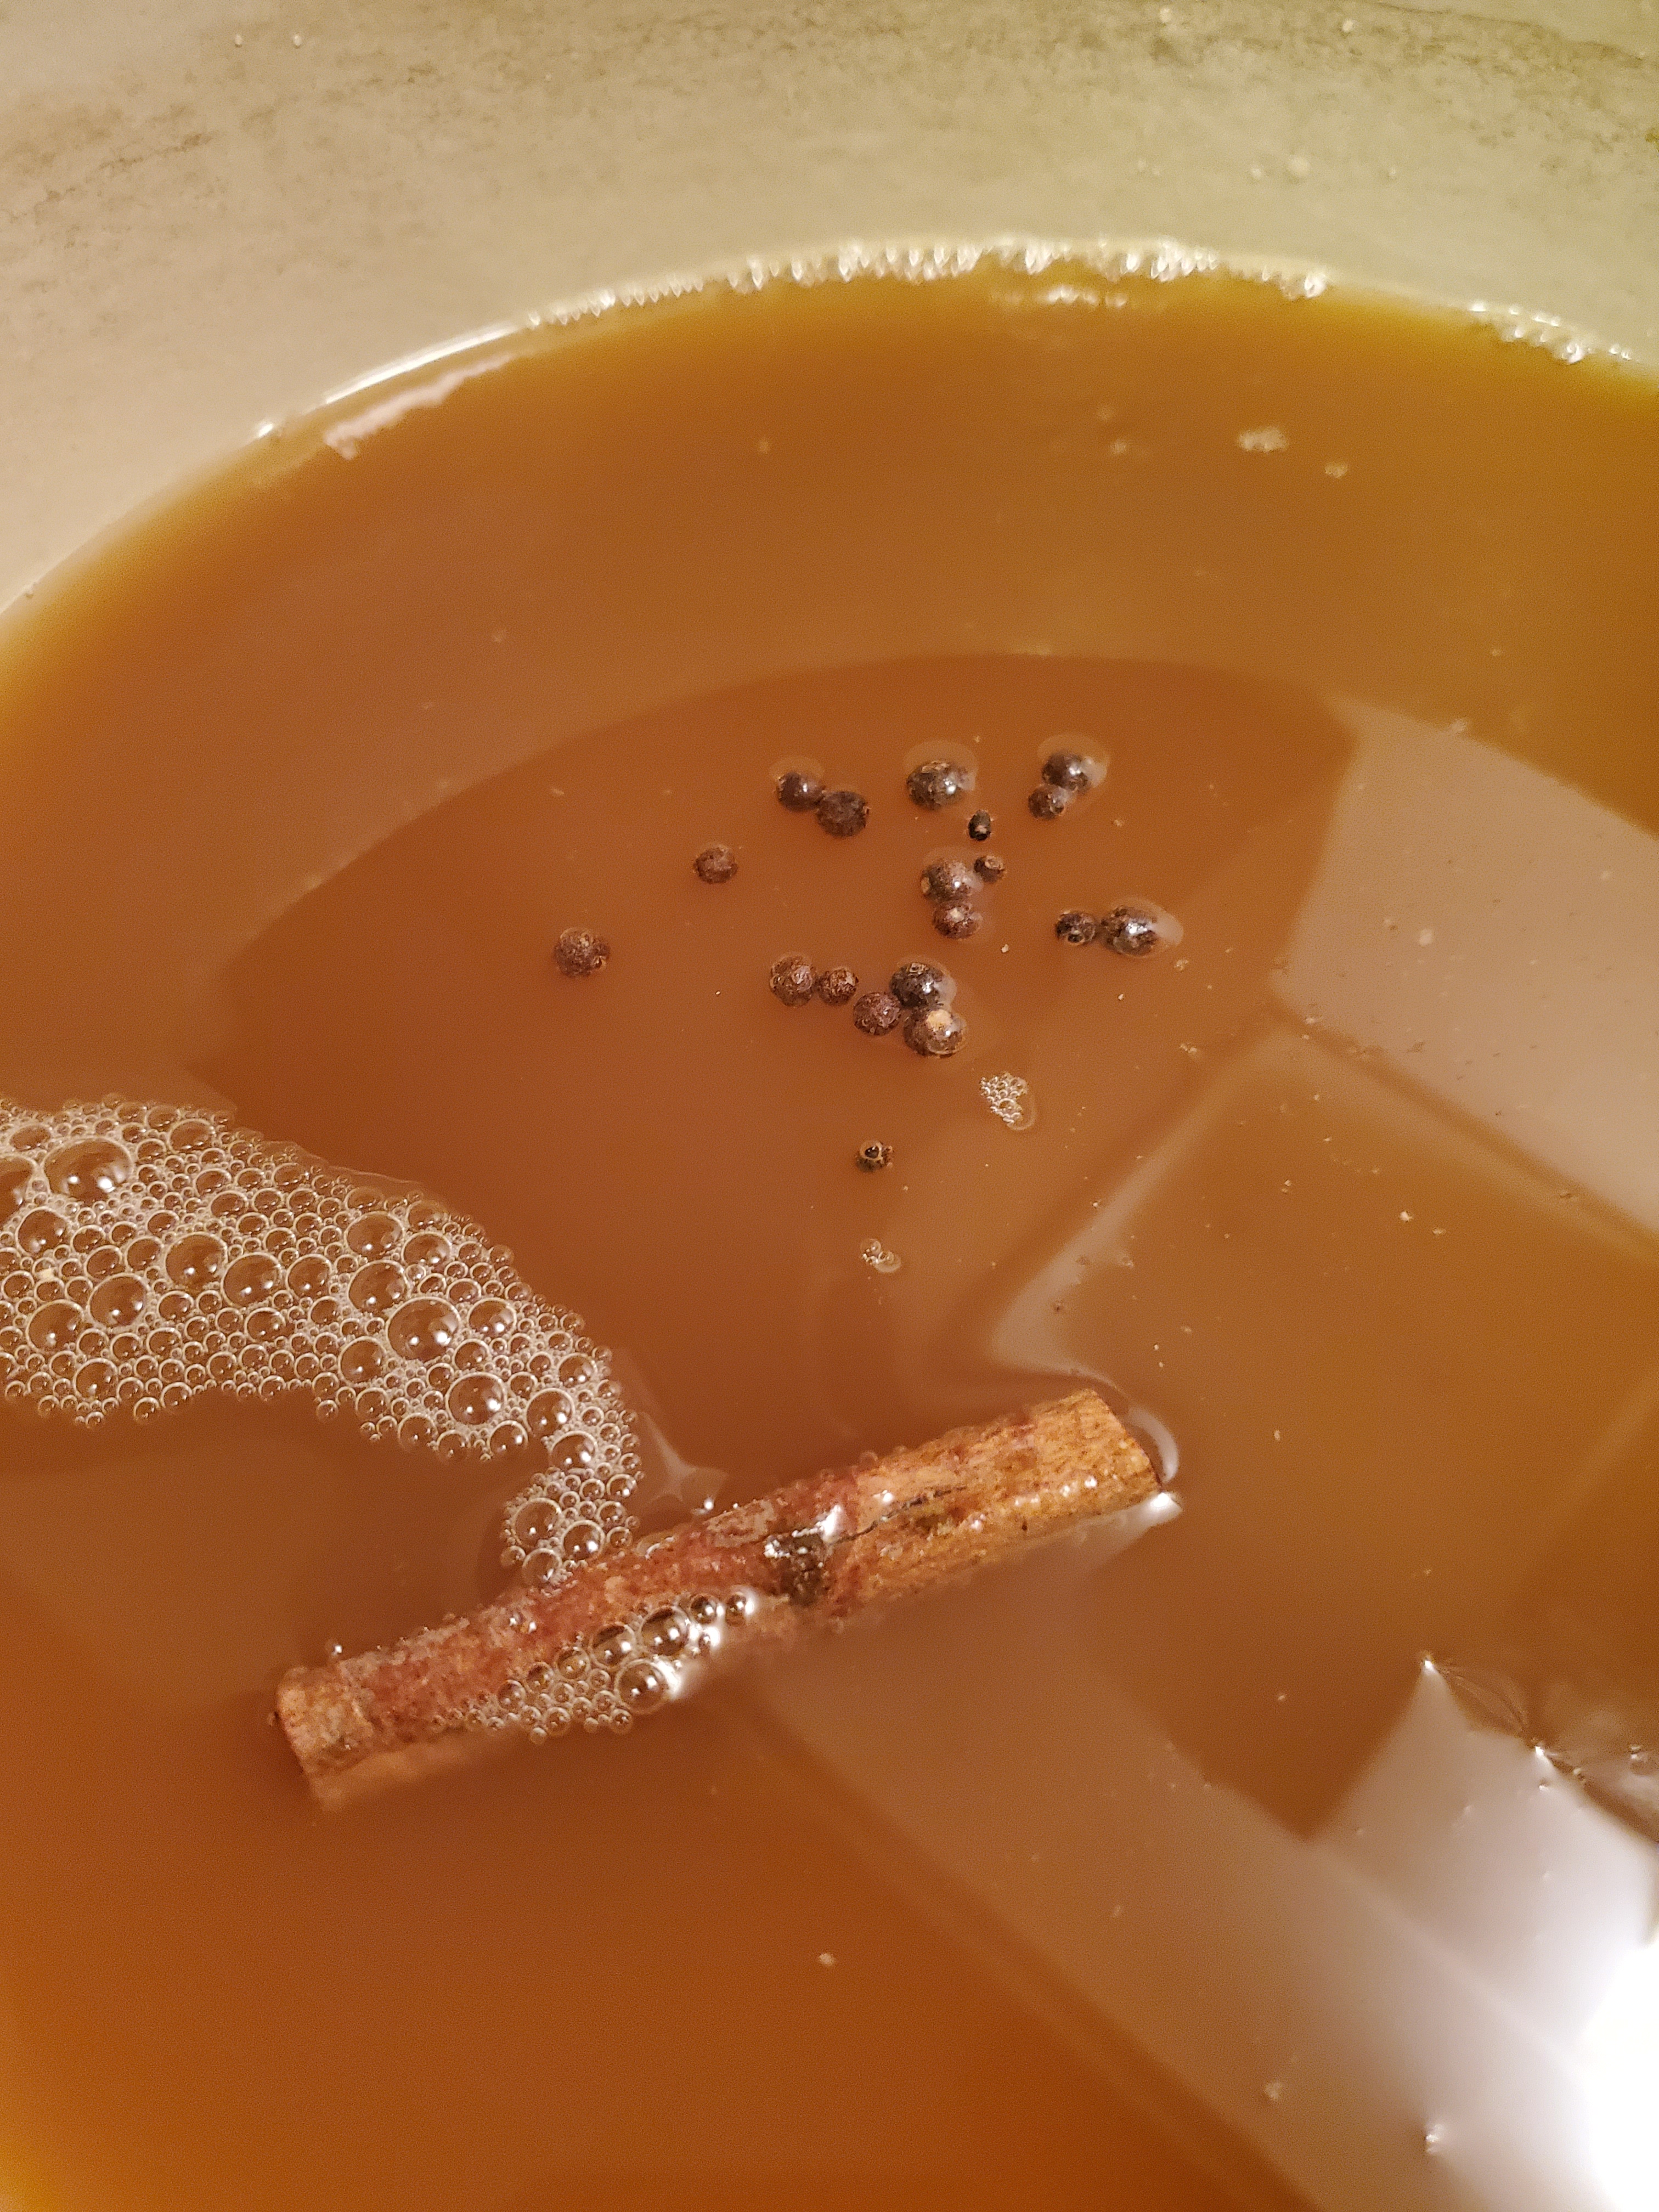 Close-up of cider - cinnamon sticks and whole allspice floating in cider.